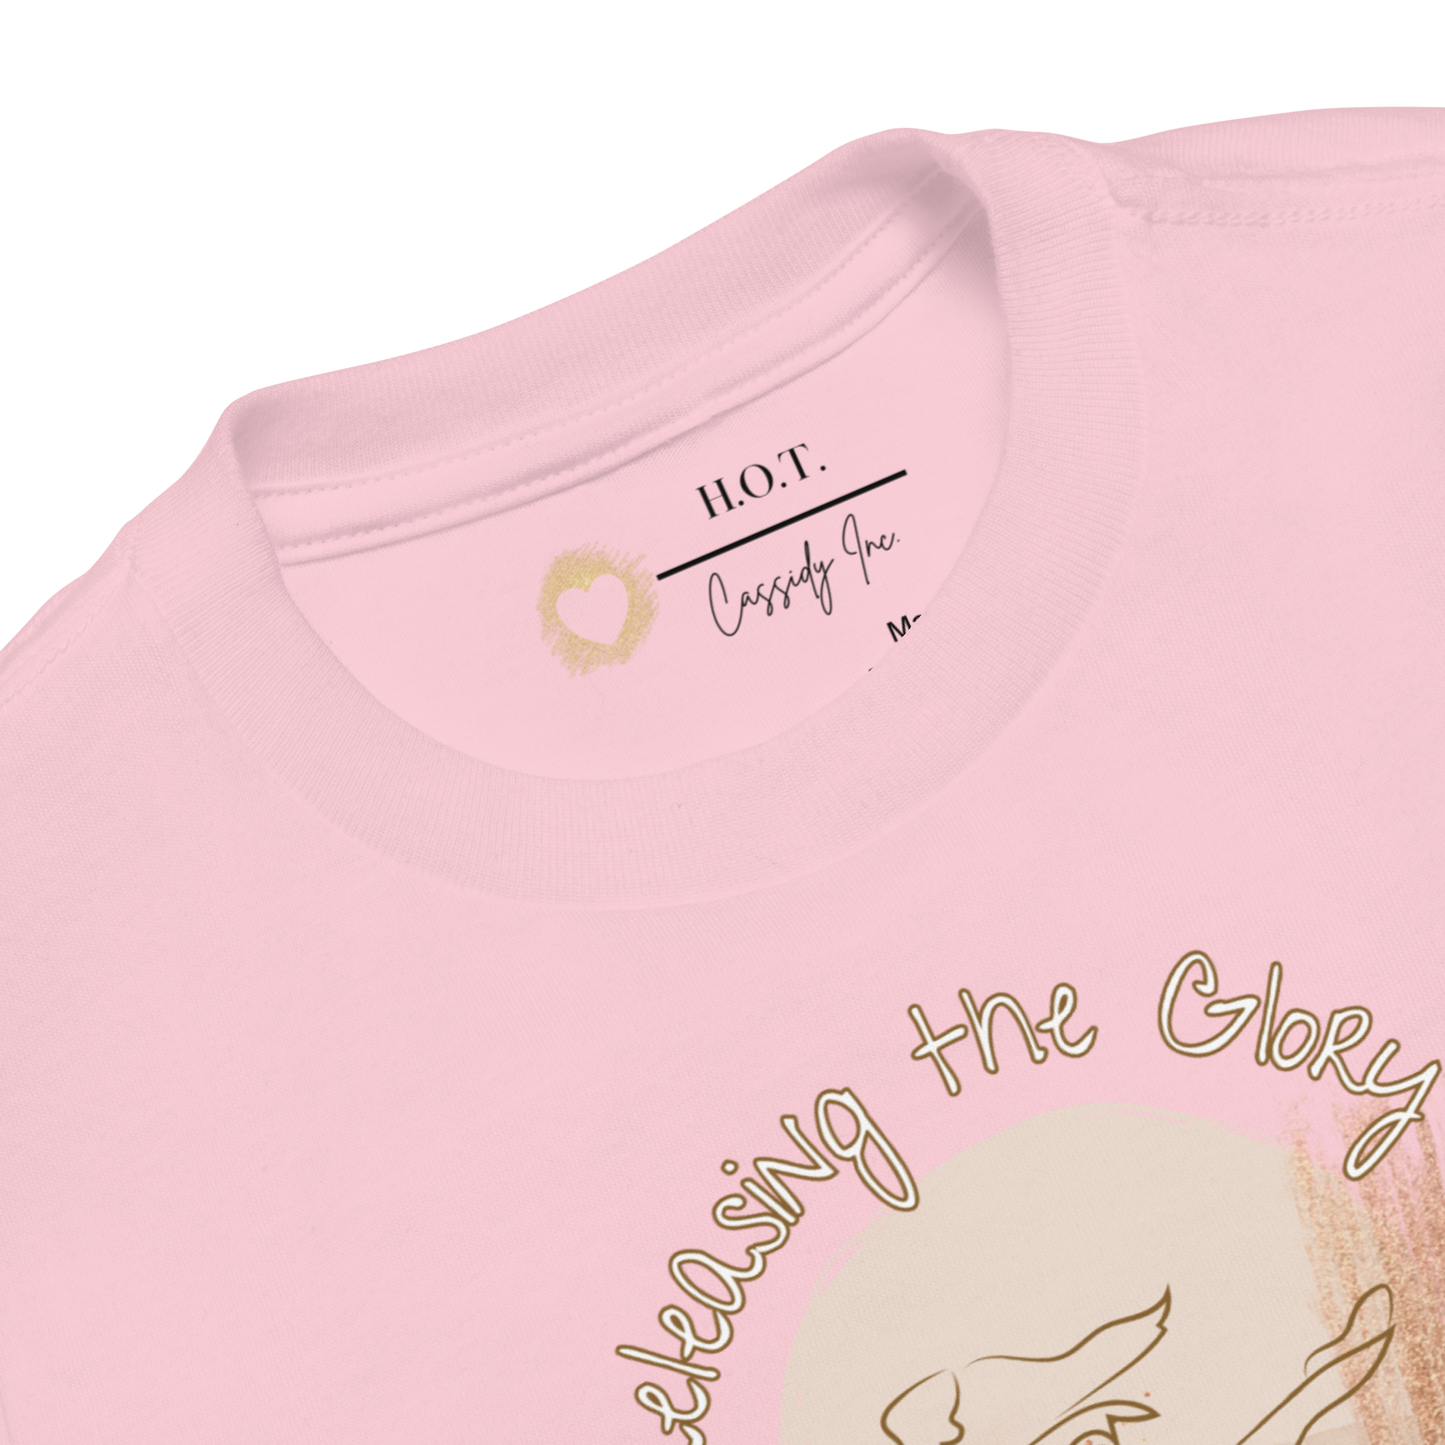 Releasing the Glory Toddler Tee